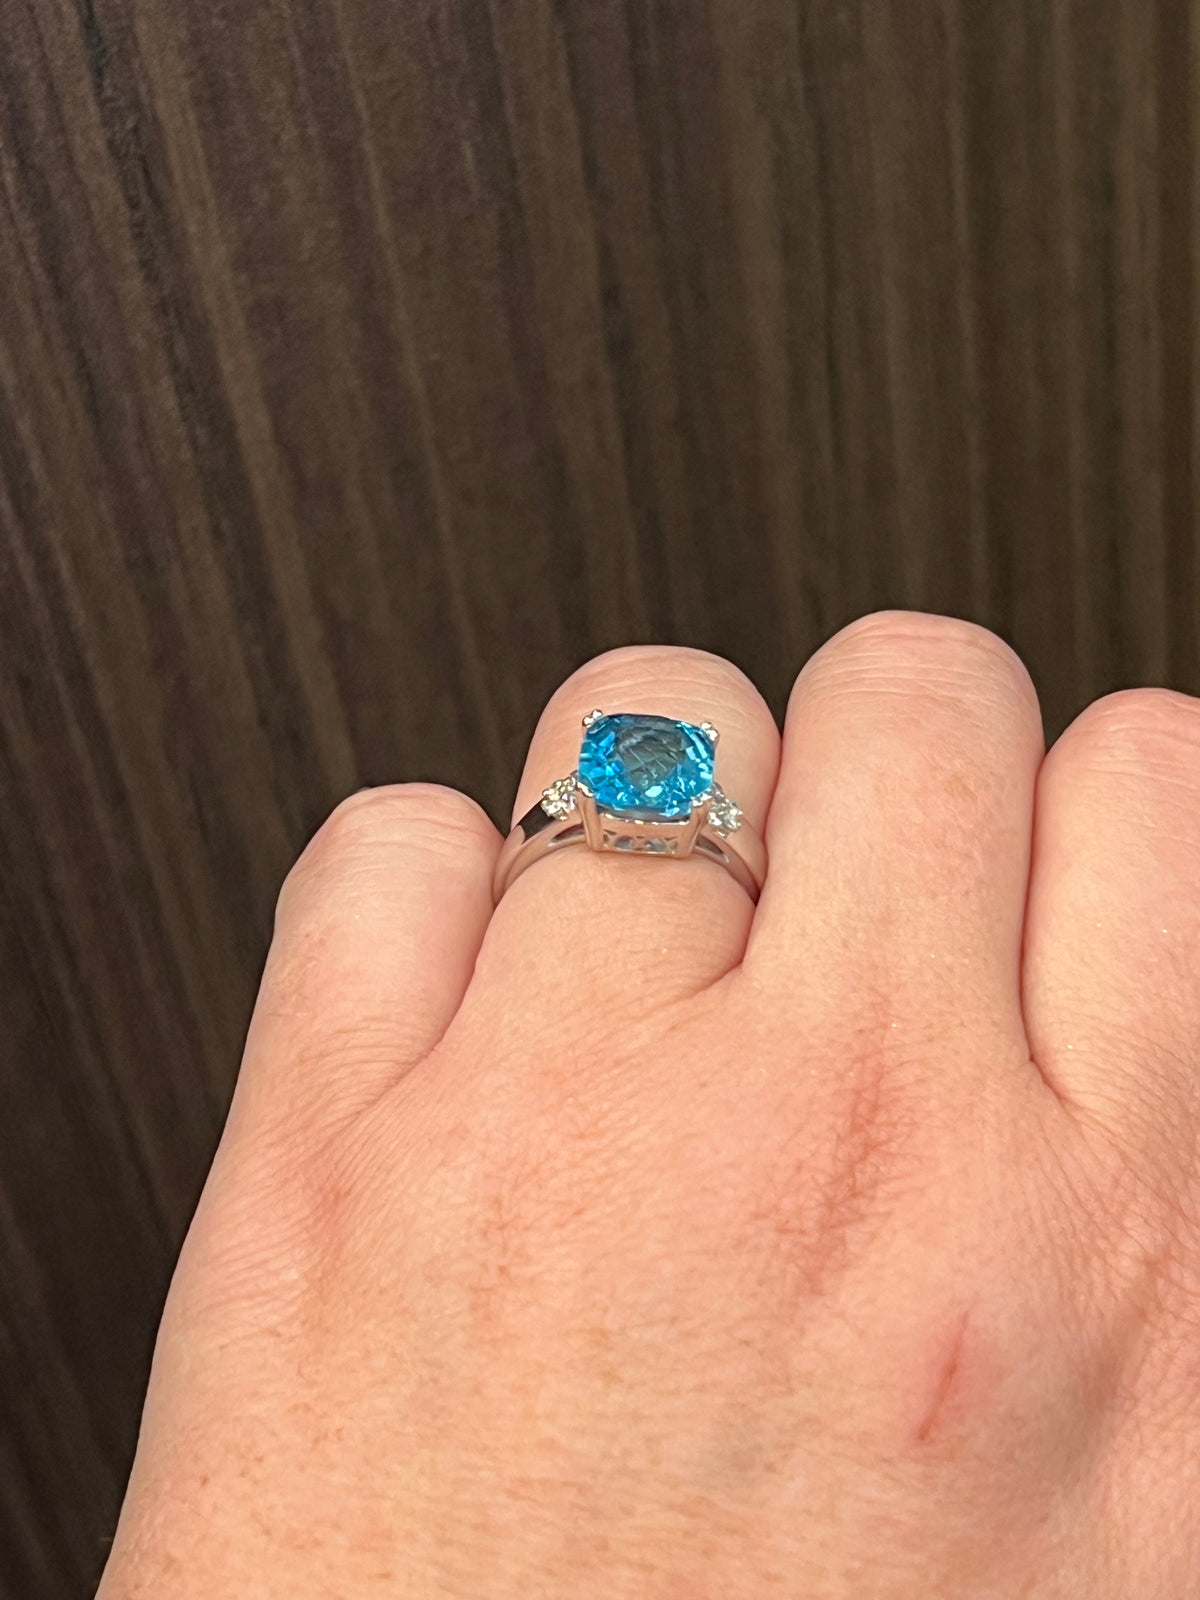 10K White Gold  9mm Blue Topaz and 0.10cttw Diamond Ring - Size 6